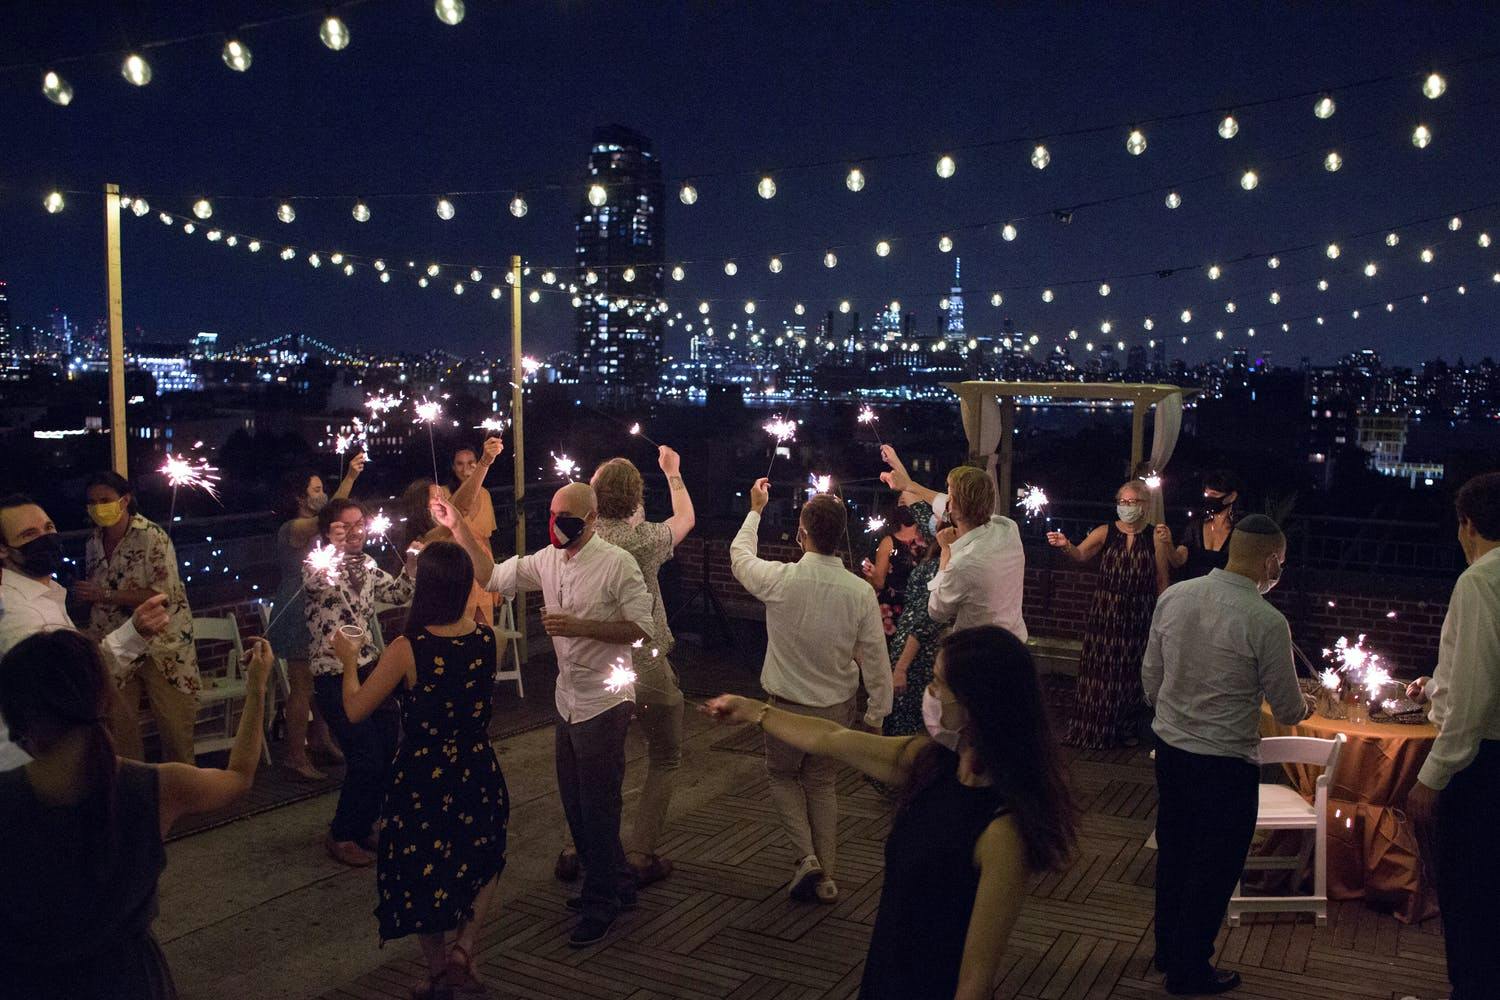 Rooftop Micro Wedding Dance Party With Fairy Lights at Night | PartySlate